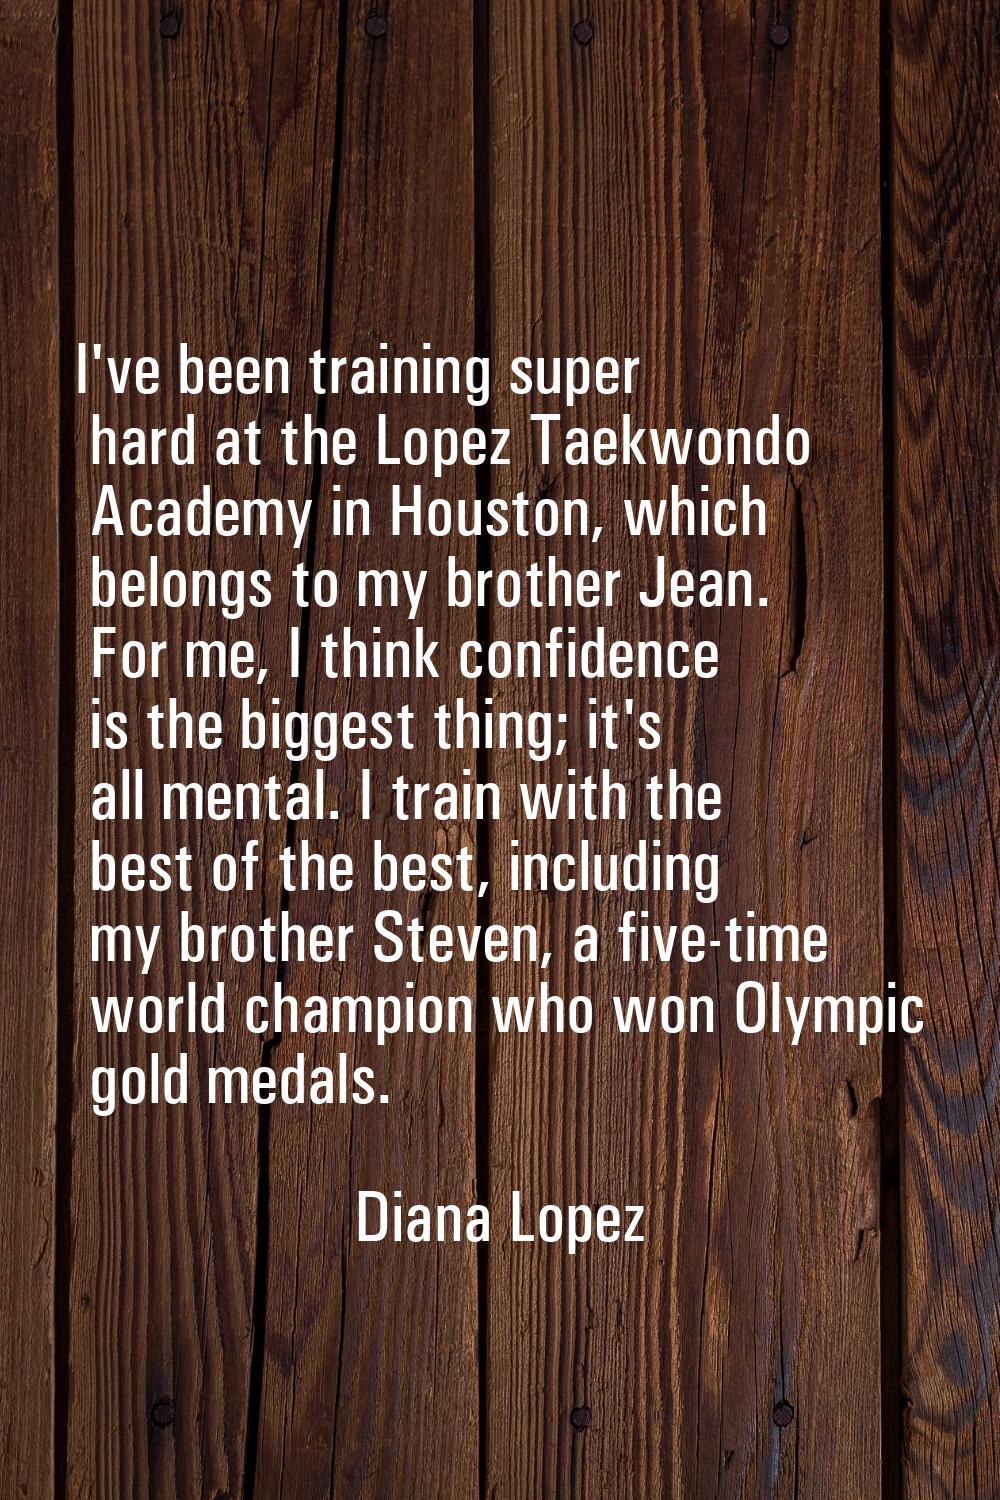 I've been training super hard at the Lopez Taekwondo Academy in Houston, which belongs to my brothe